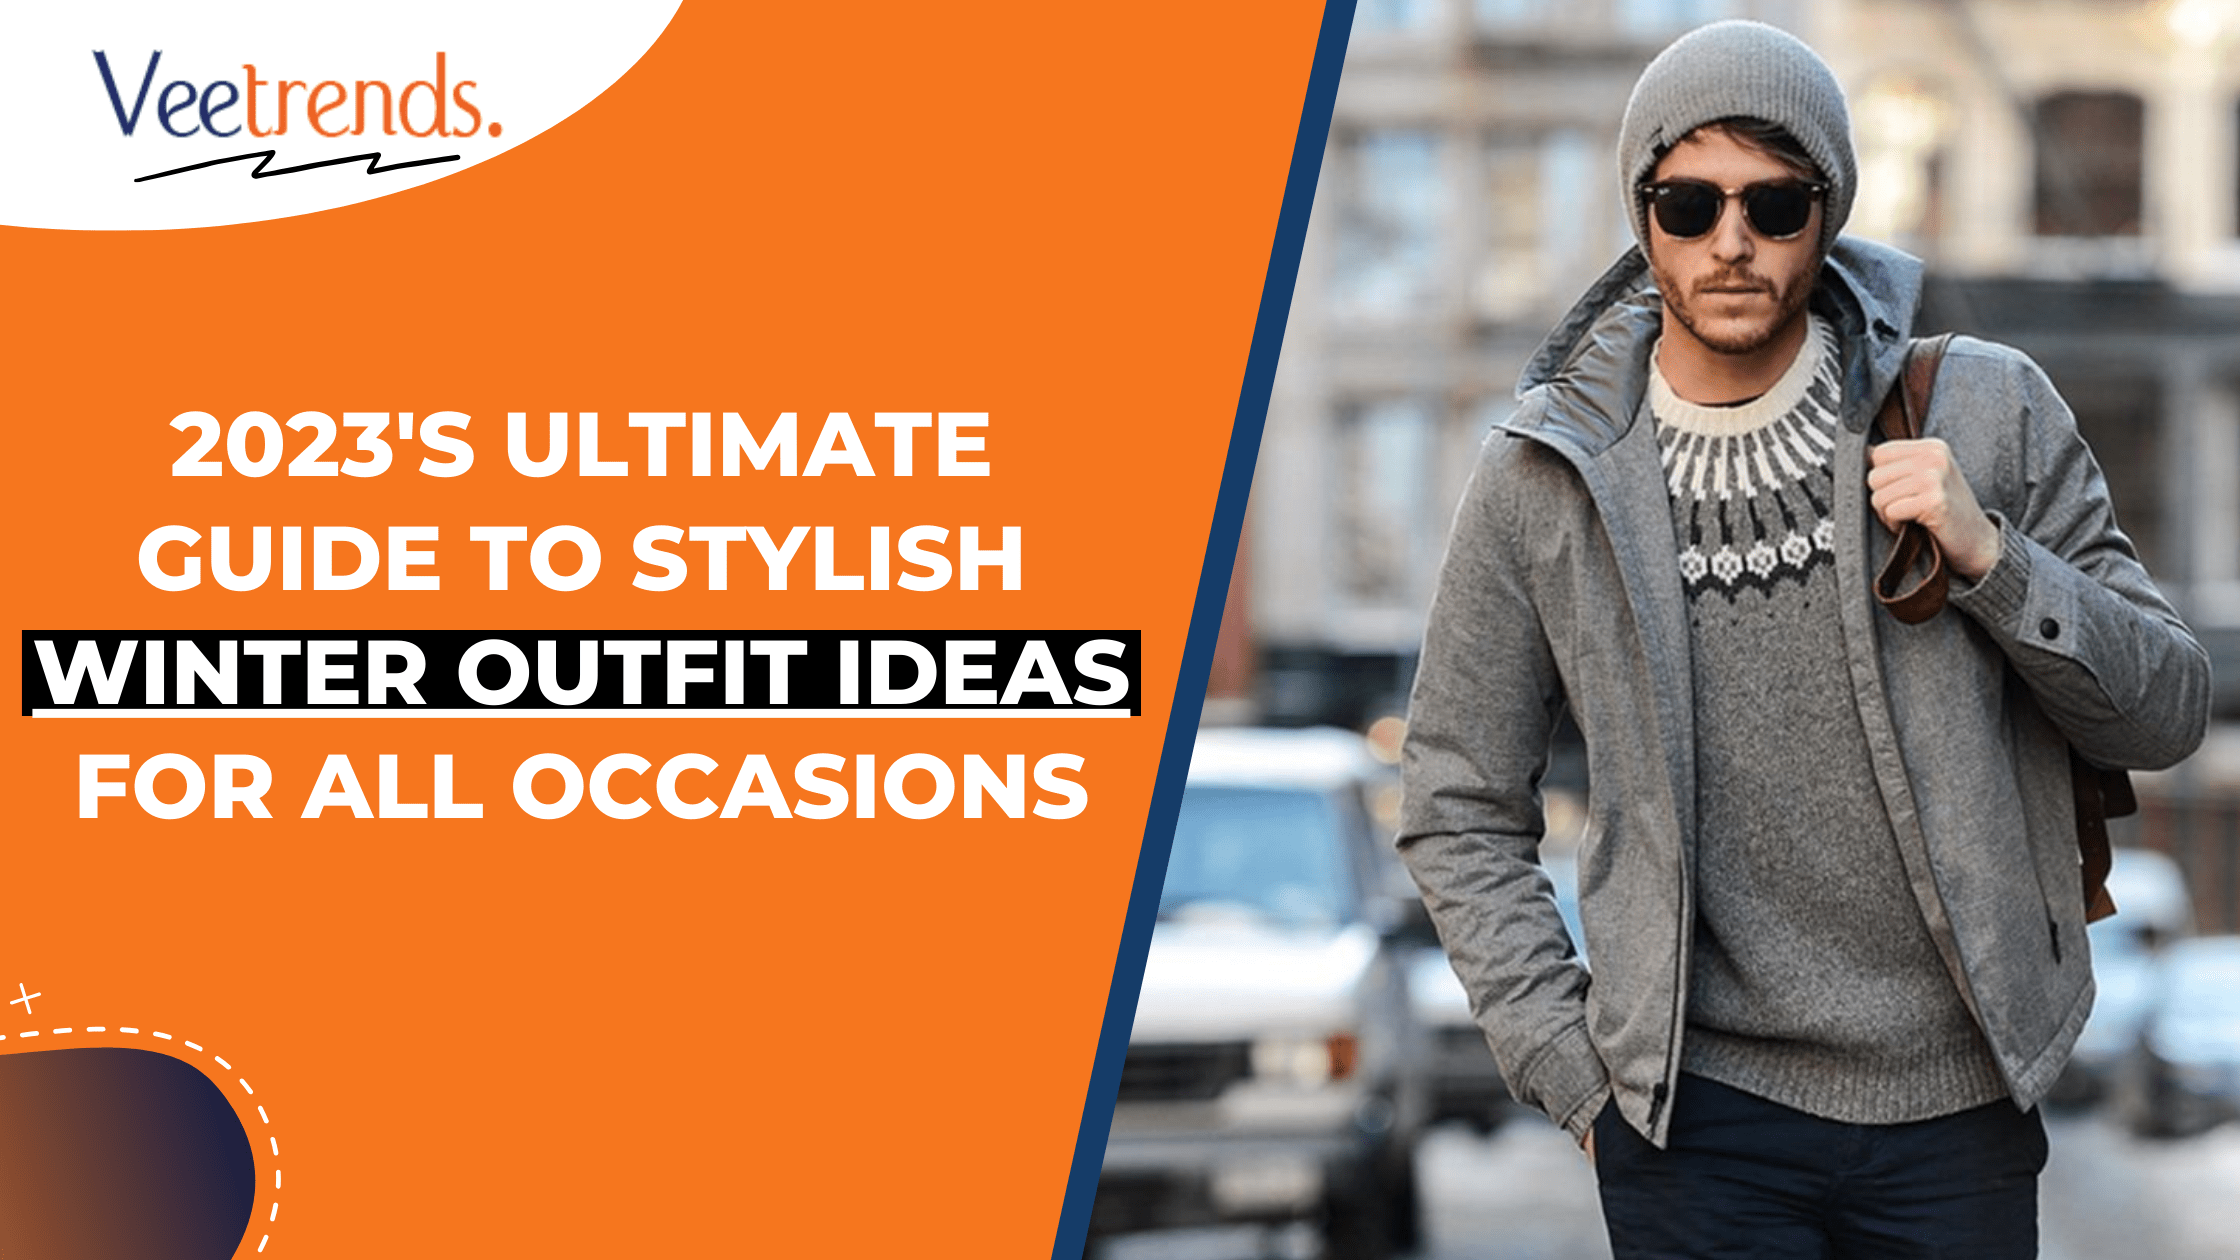 How to Dress for Winter: The Ultimate Guide